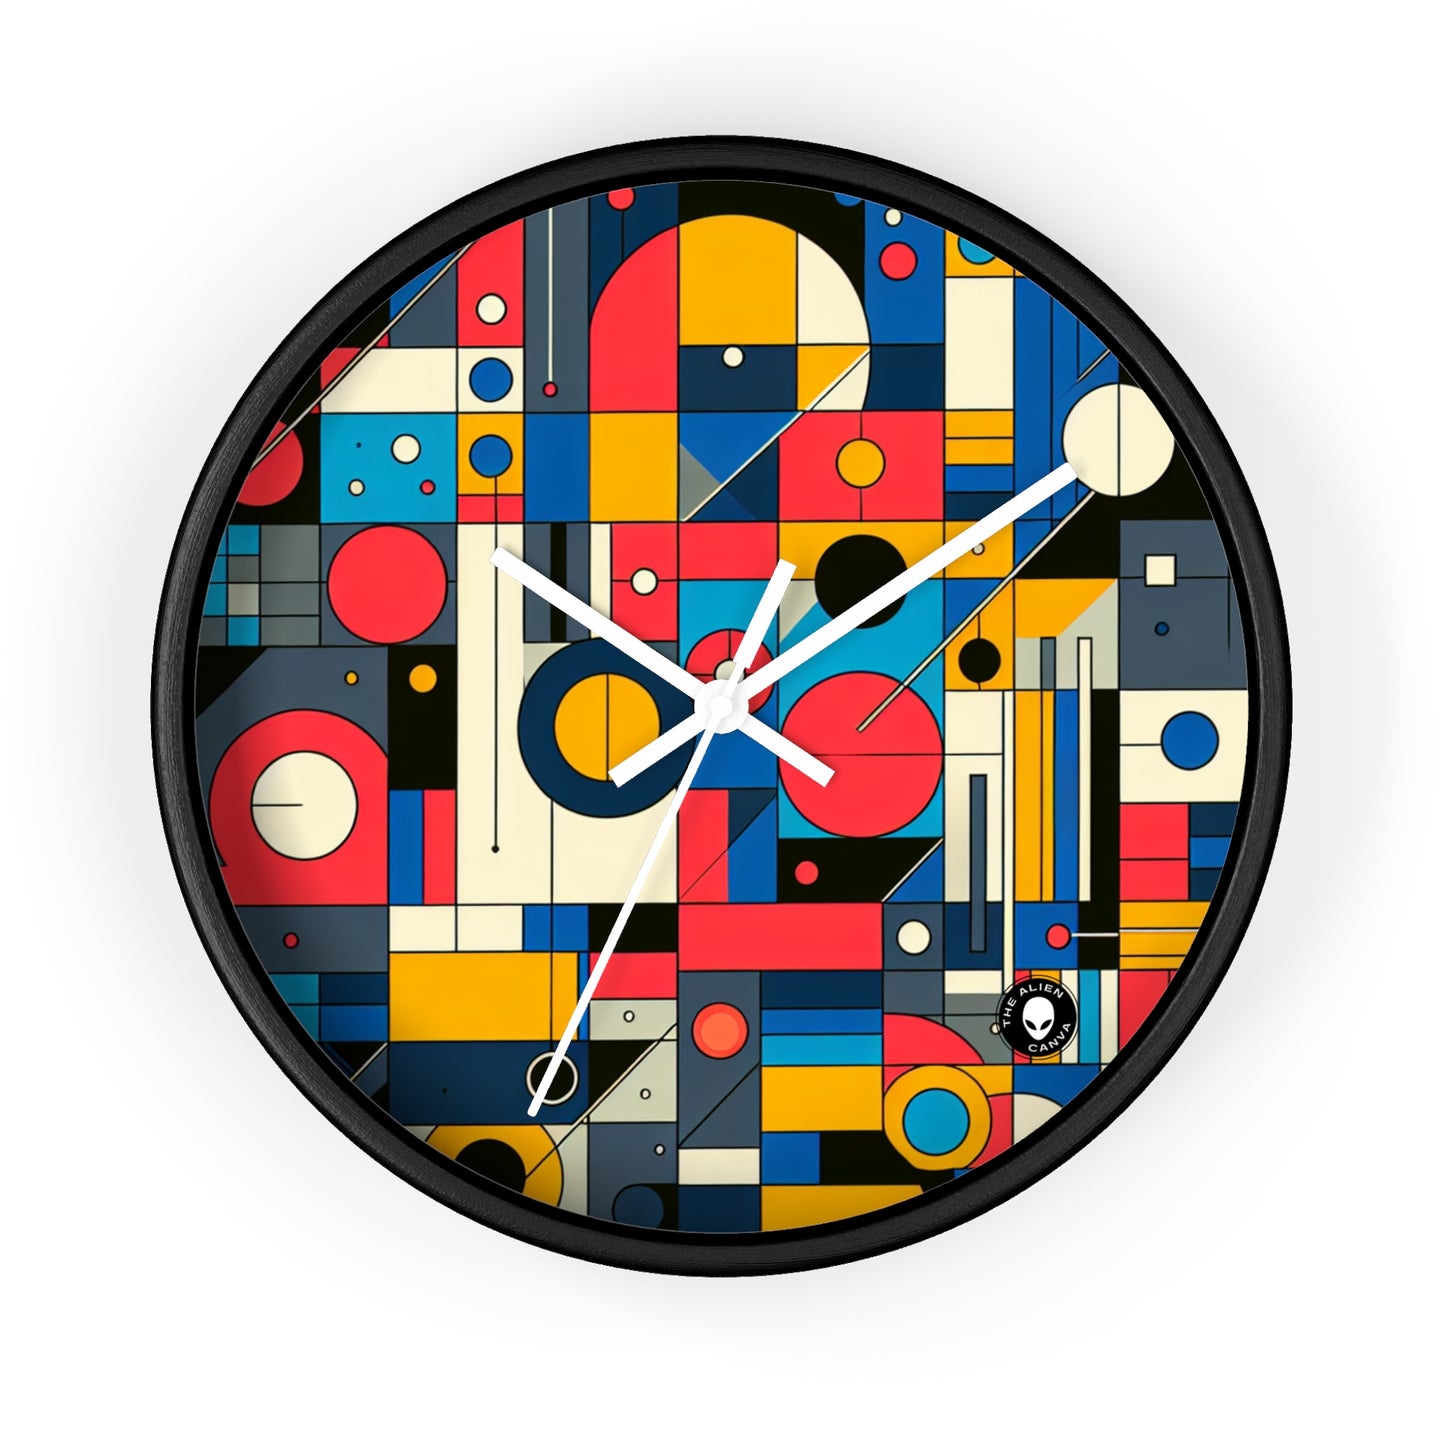 "Harmony in Nature: Geometric Abstraction" - The Alien Wall Clock Geometric Abstraction